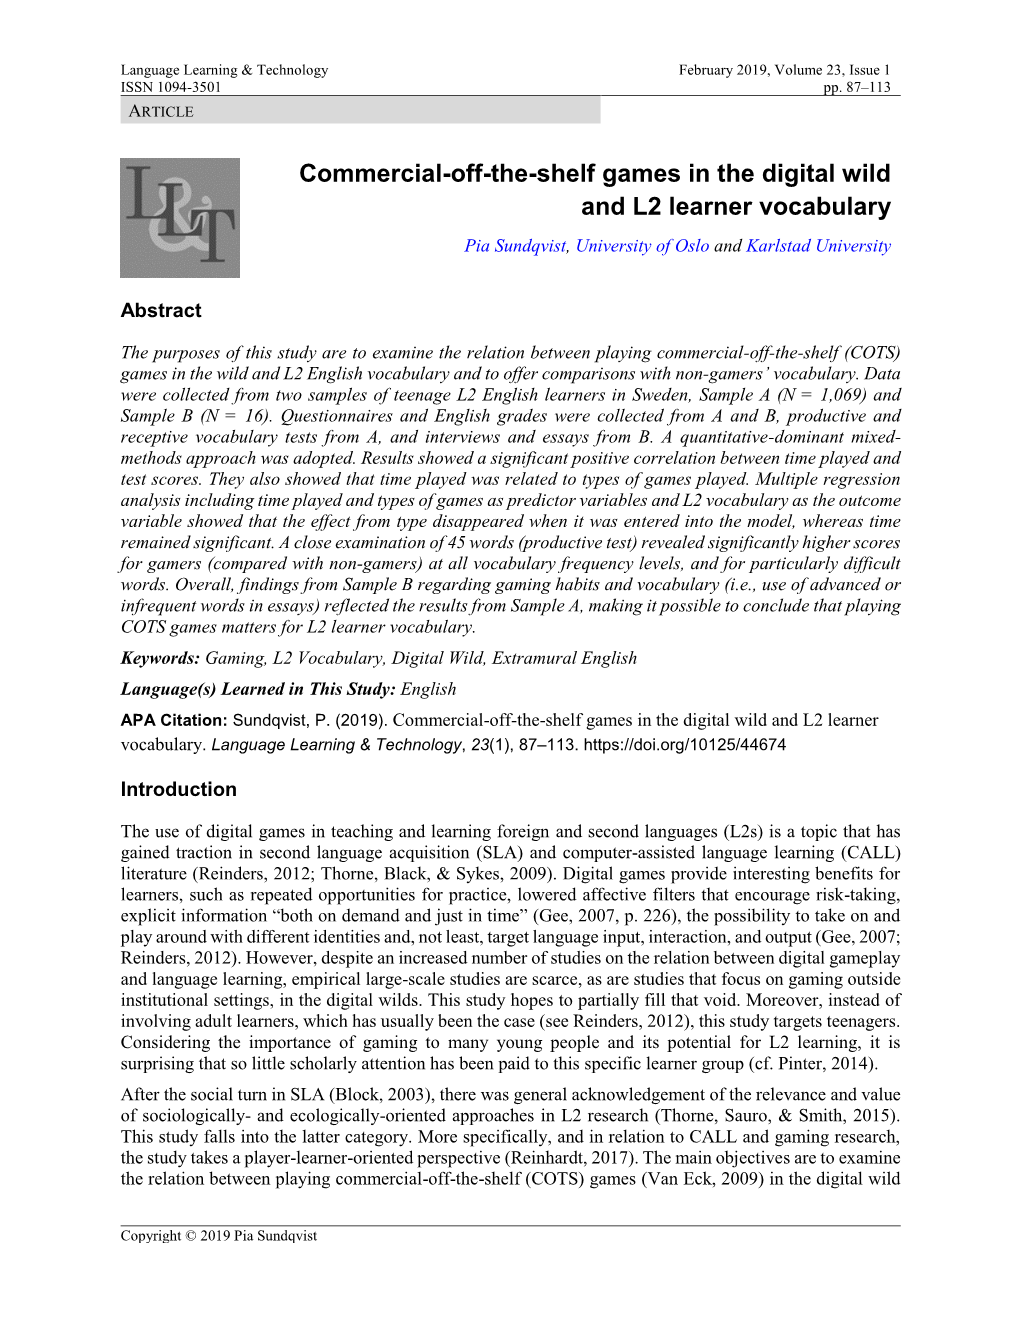 Commercial-Off-The-Shelf Games in the Digital Wild and L2 Learner Vocabulary Pia Sundqvist, University of Oslo and Karlstad University